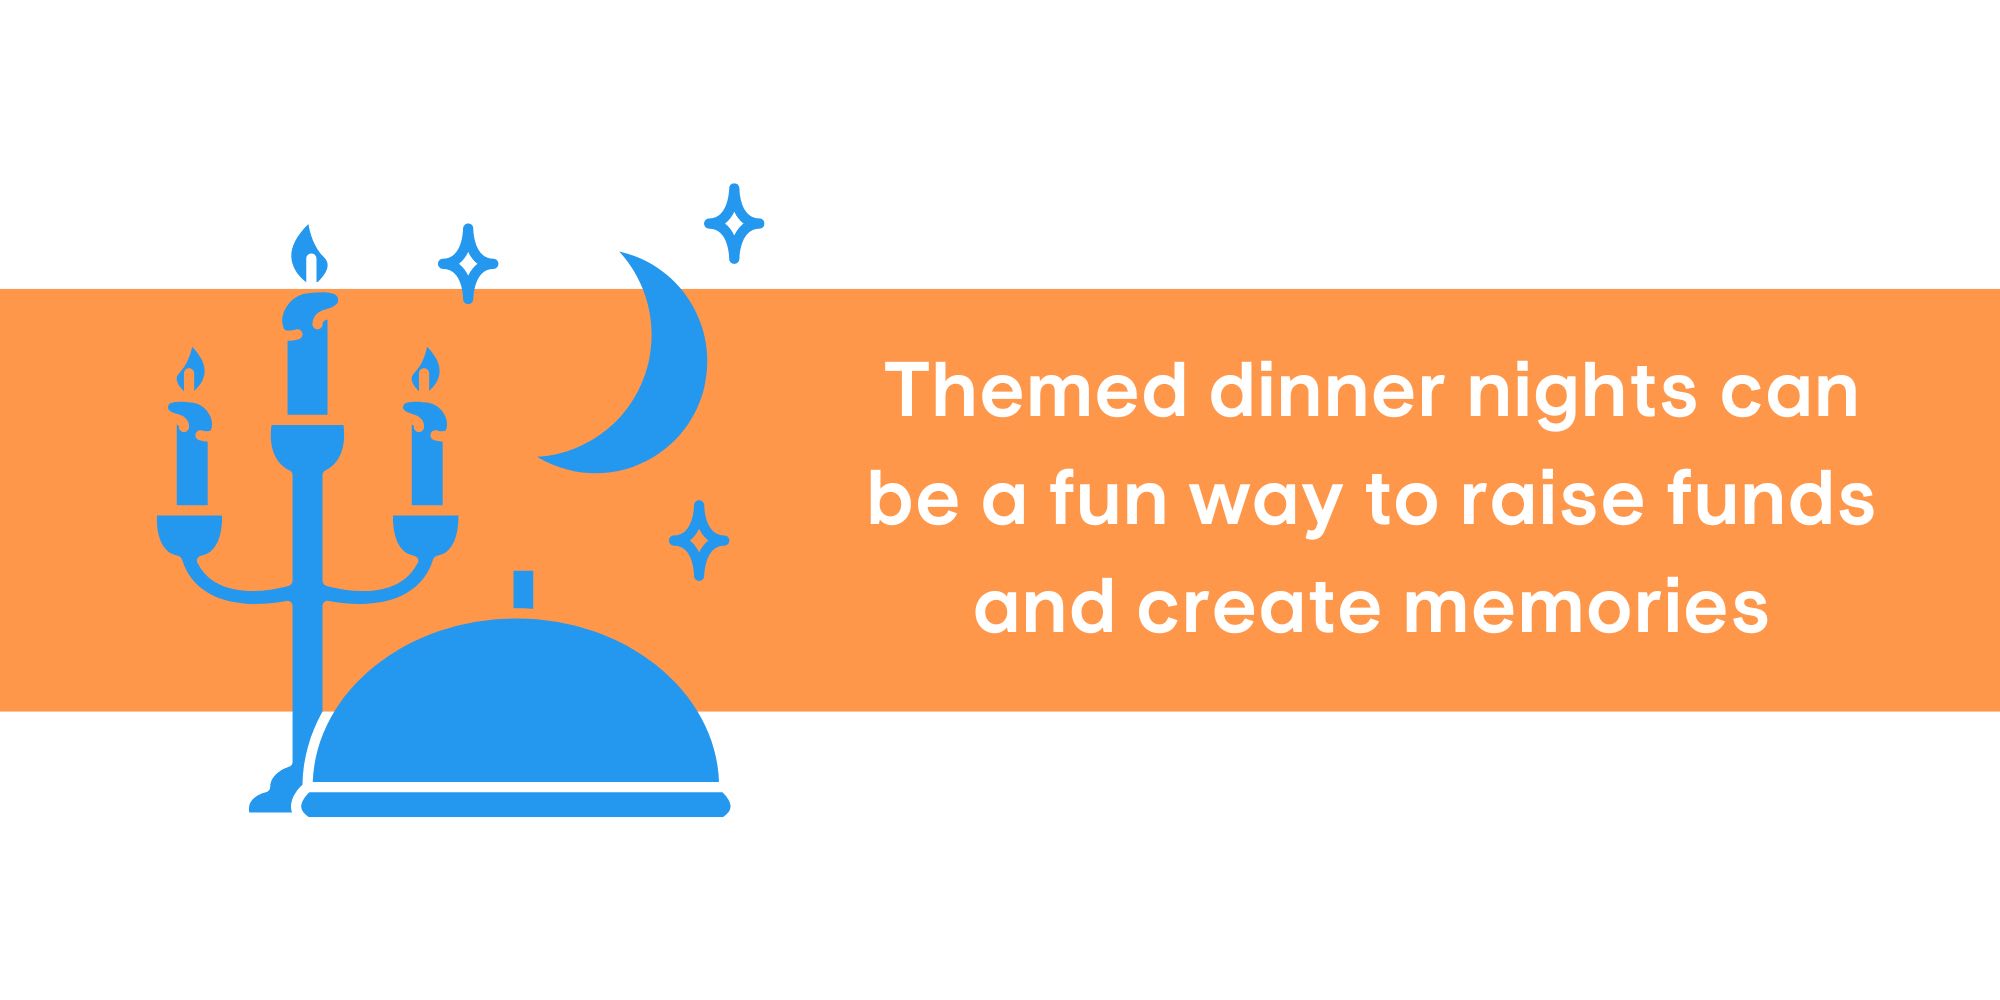 Themed dinner nights are a great way to raise youth camp funds